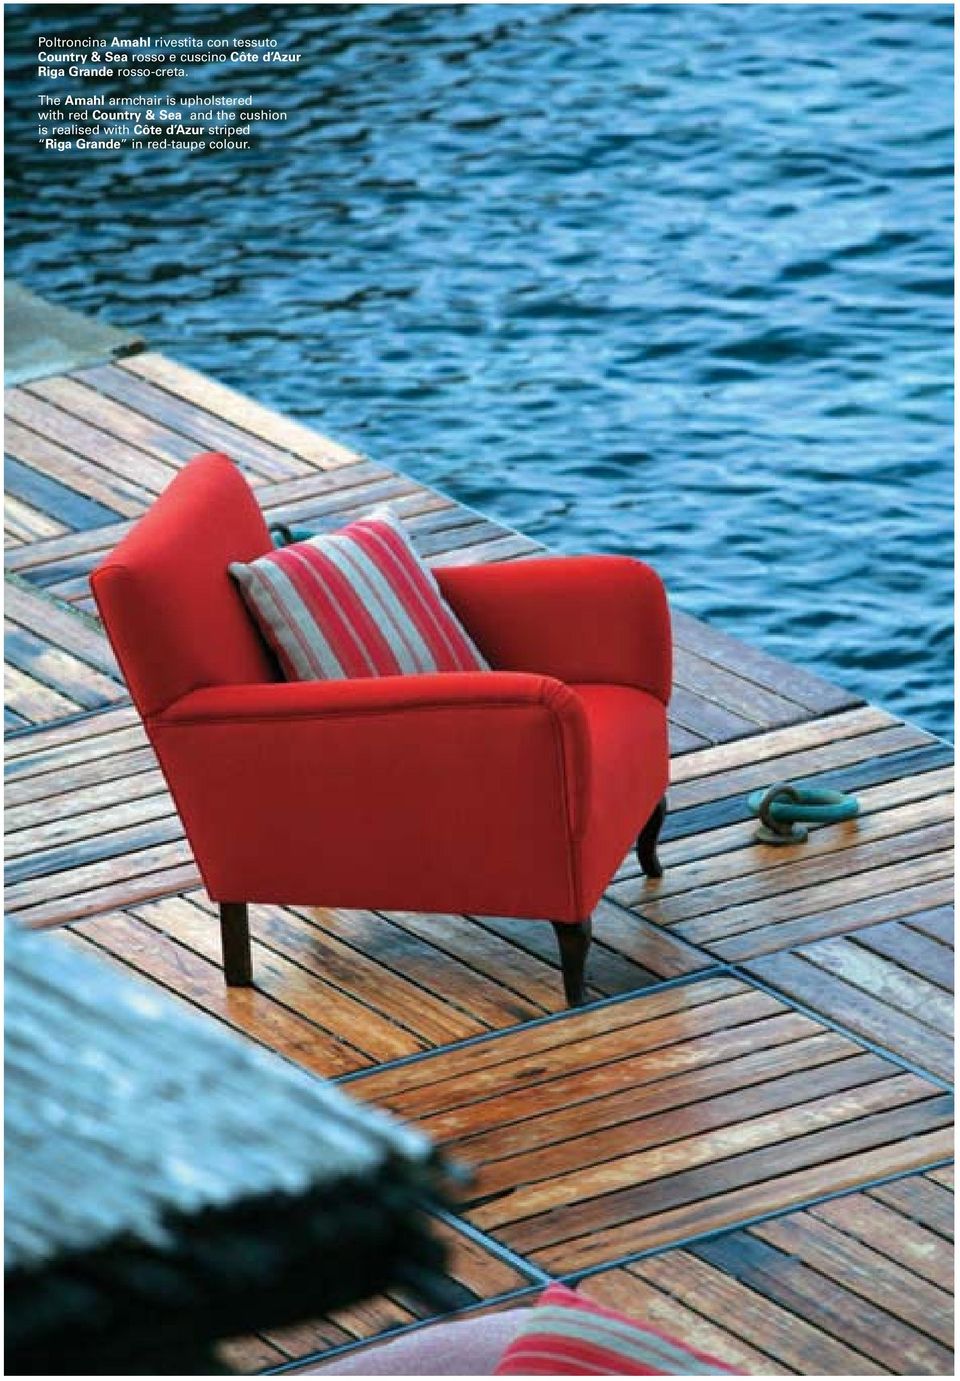 The Amahl armchair is upholstered with red Country & Sea and